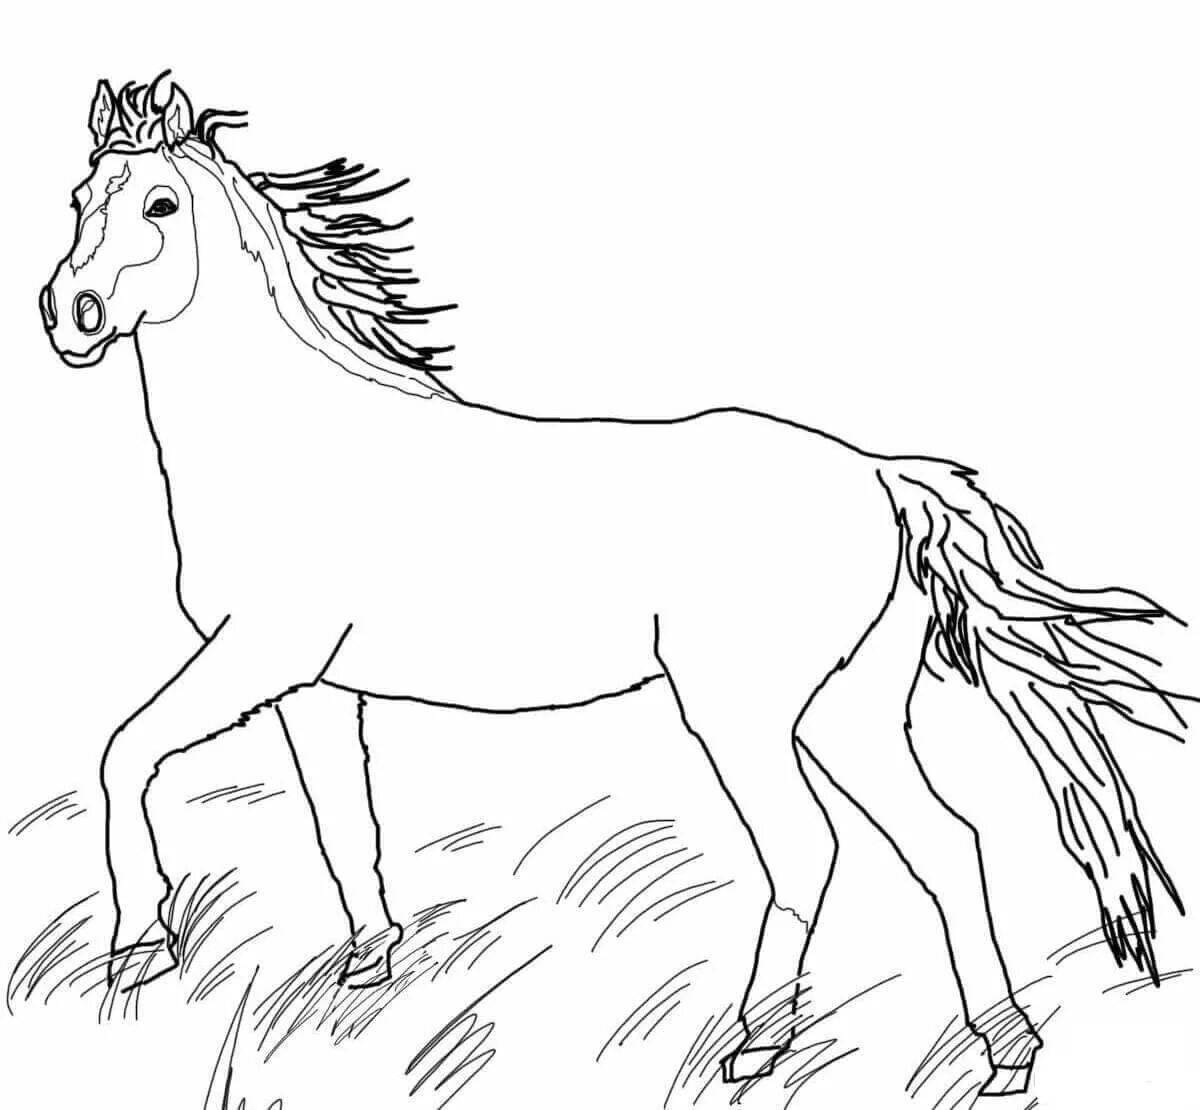 Exquisite lanky horse coloring page